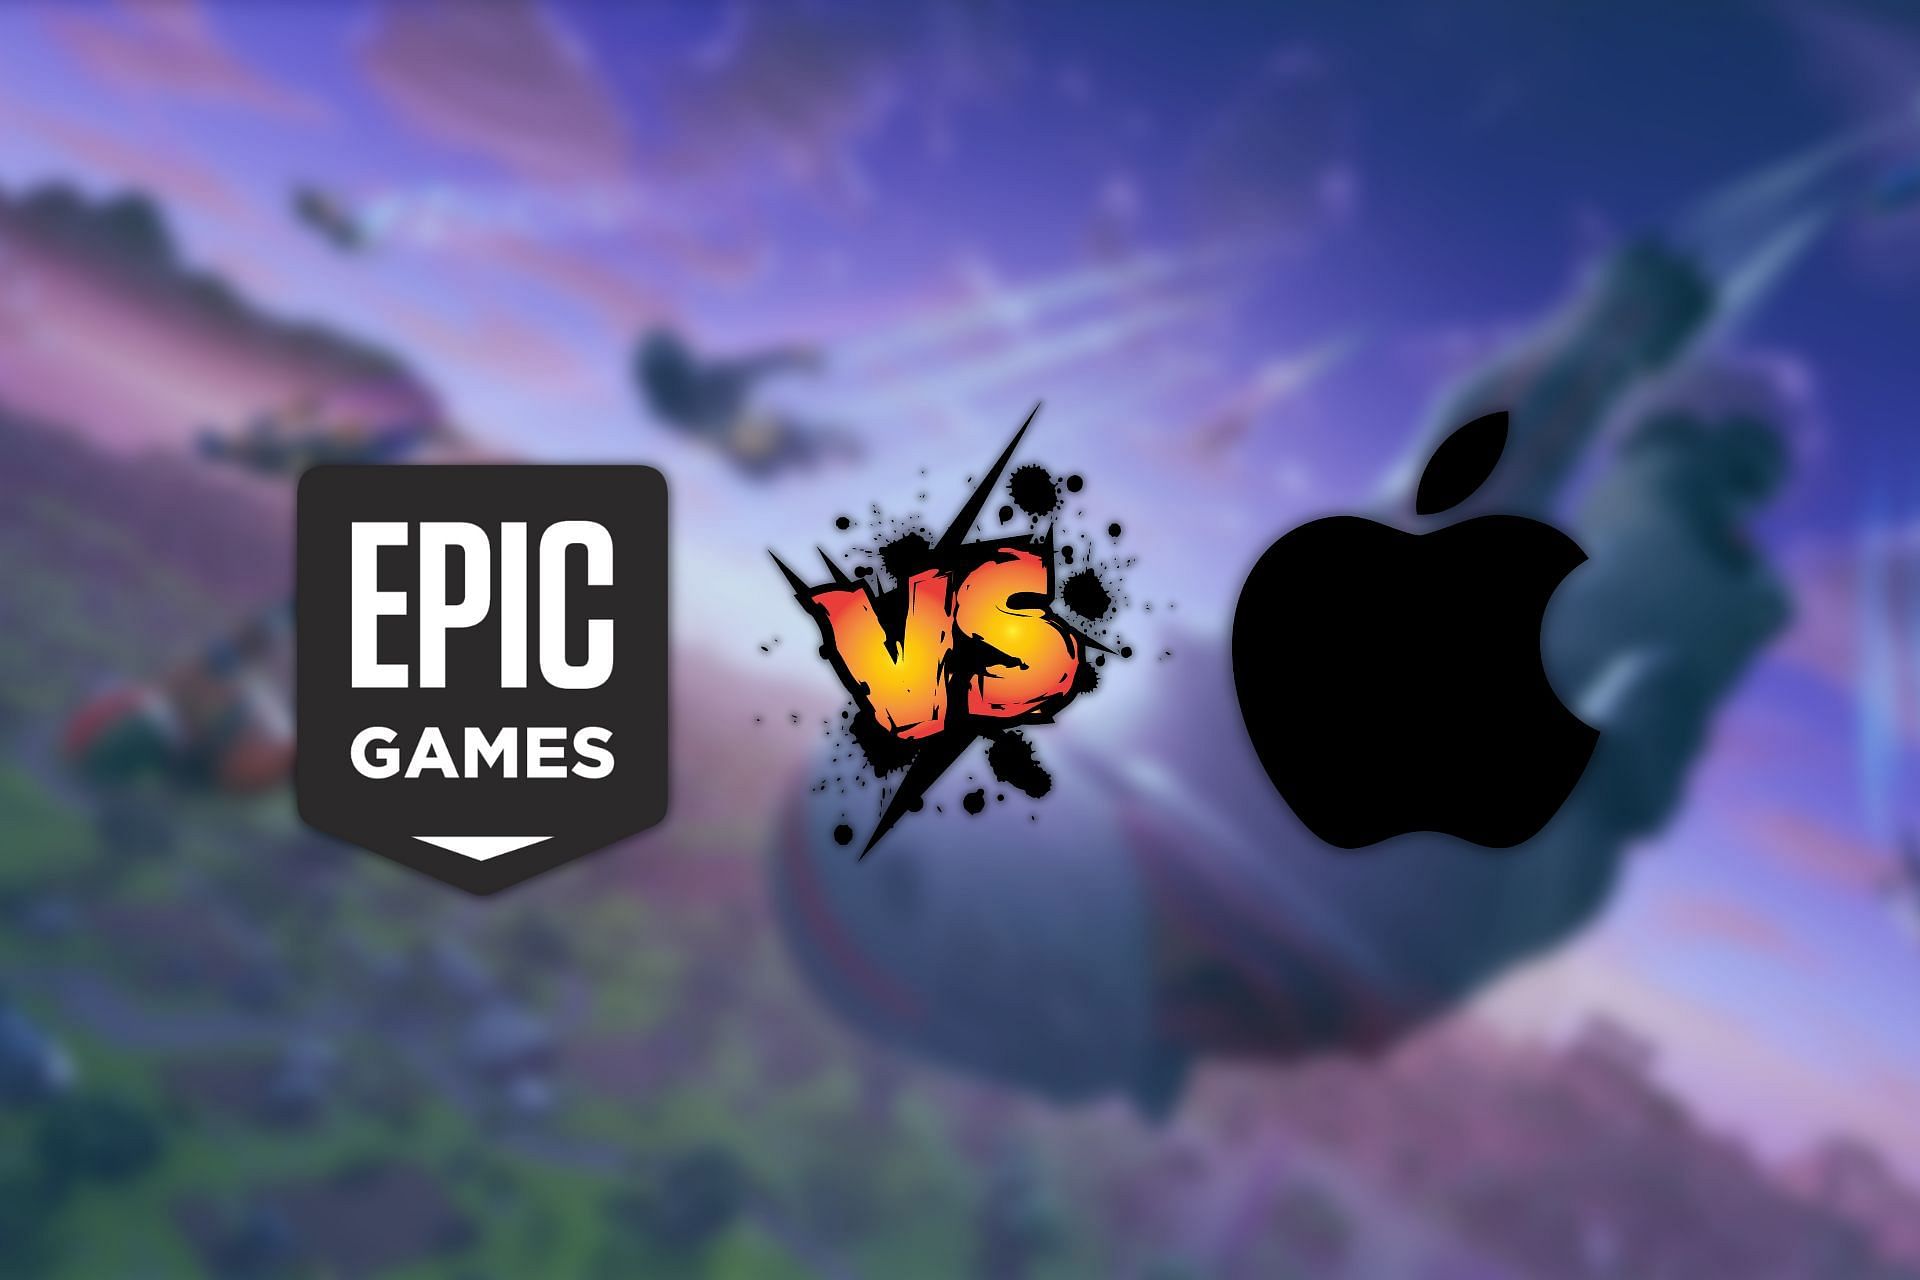 Will Fortnite and Apple come to an agreement? The state of Apple vs